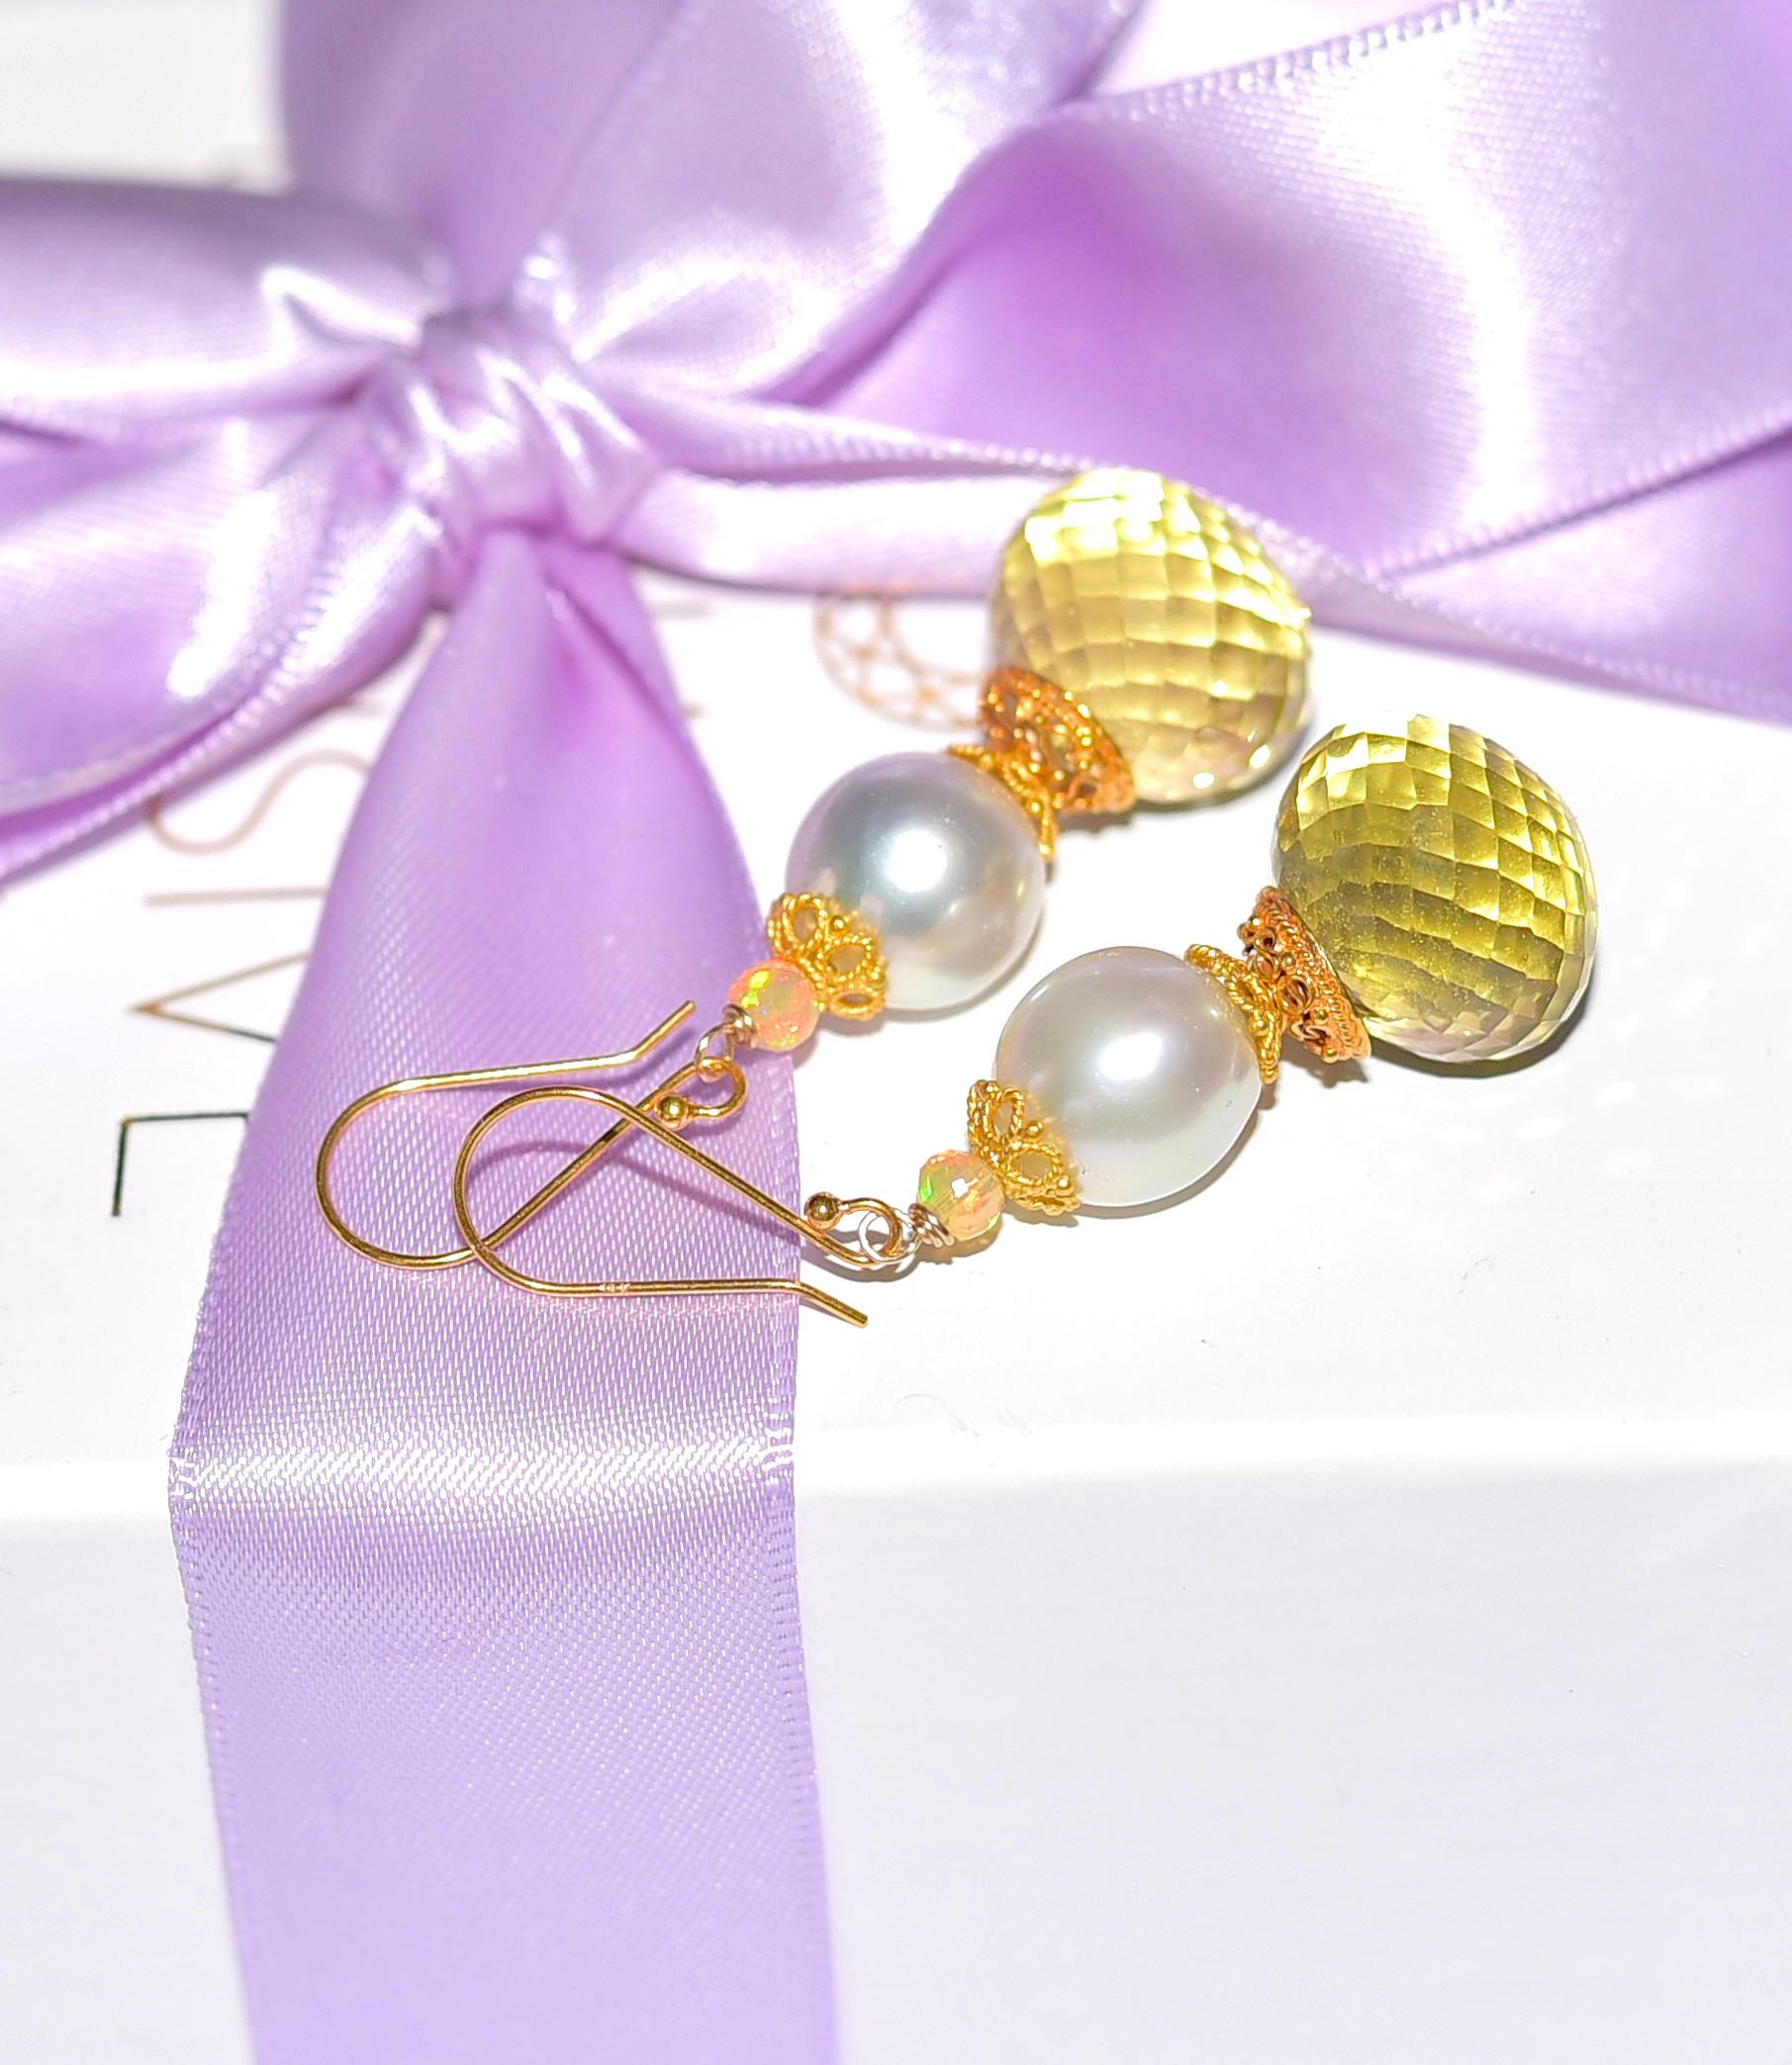 Summery, bright, and shiny! Simple and everyday sun-tone earrings are decorated with 18K Solid Yellow Gold details. The pearl adds elegance and the small opal beads add character.

Lemon Quartz 15mm
South Seal Pearl 12mm 
Opal beads 3mm 

Total